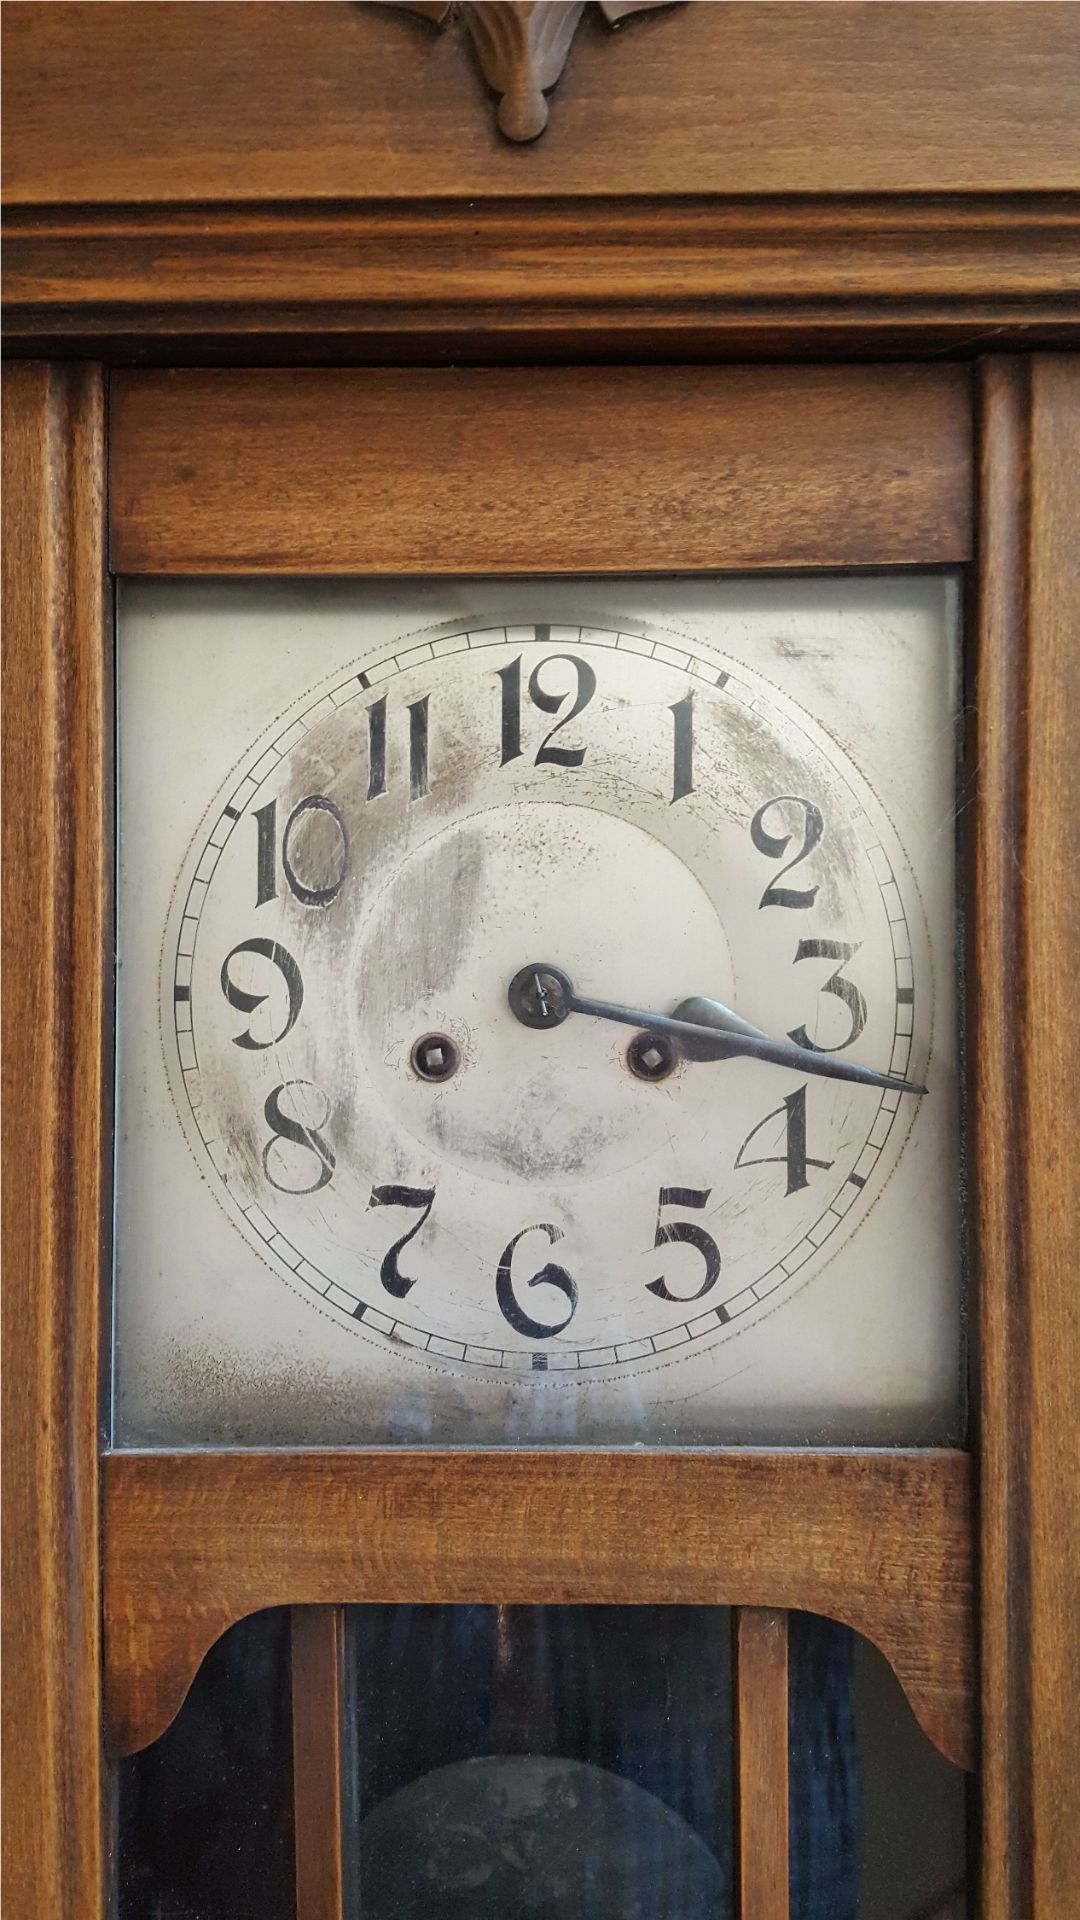 Antique Vintage Wall Clock With Possible Russian Connection - Image 2 of 7